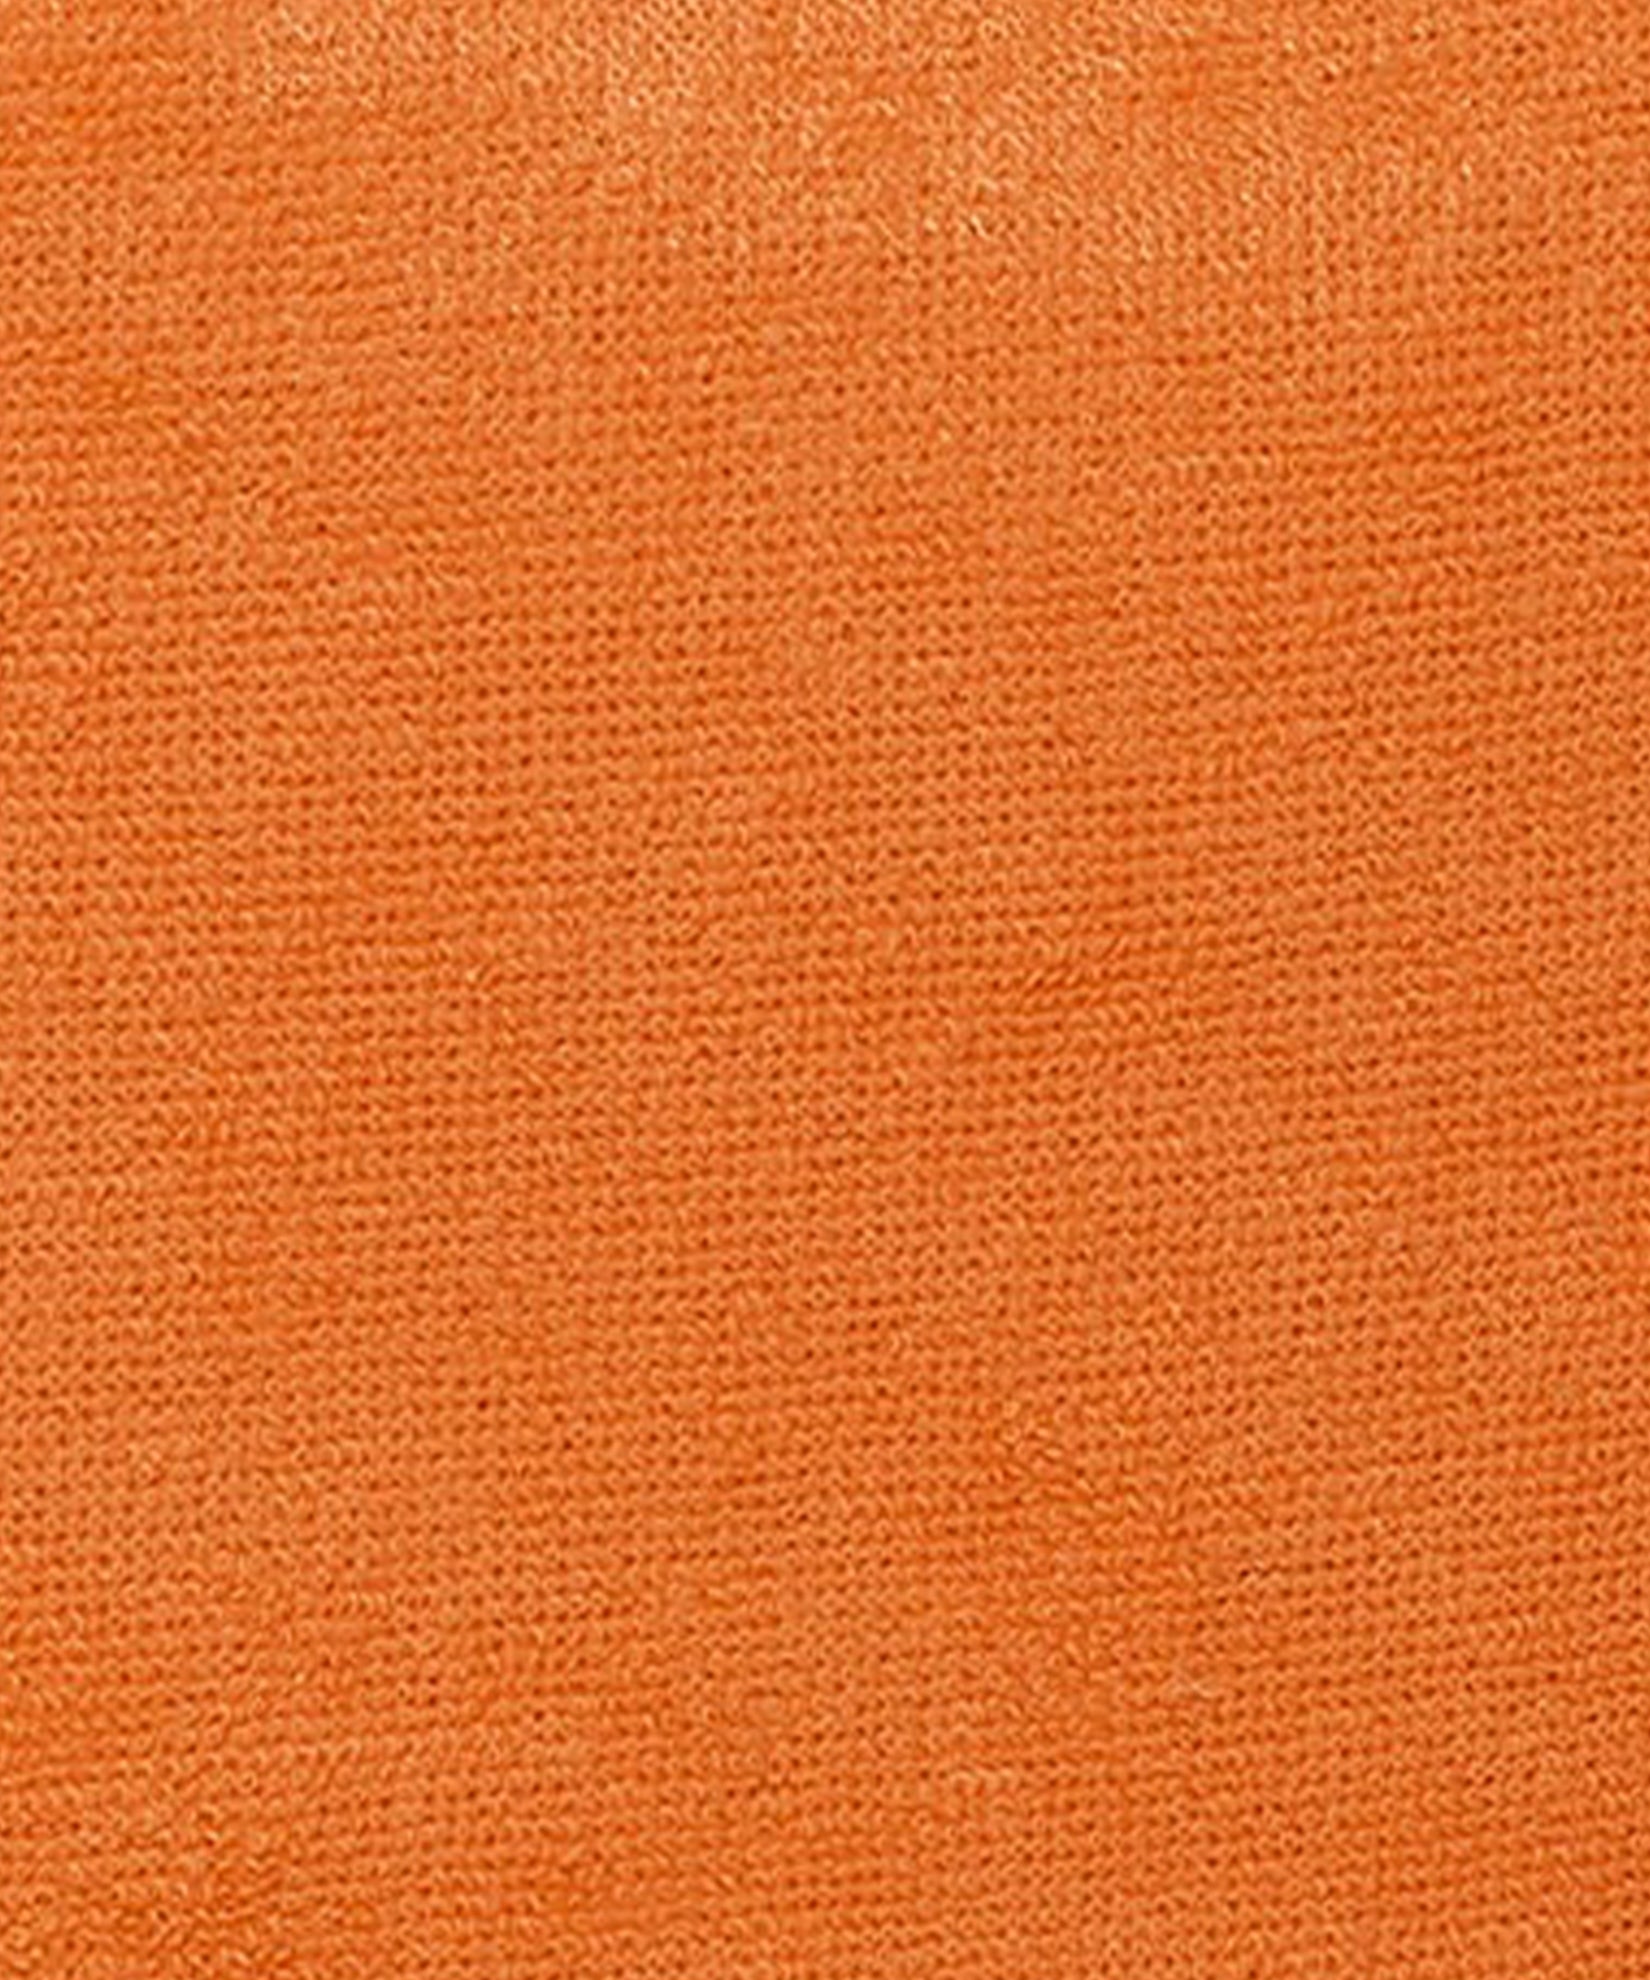 Terry Cosmetic Bag in color Tangerine